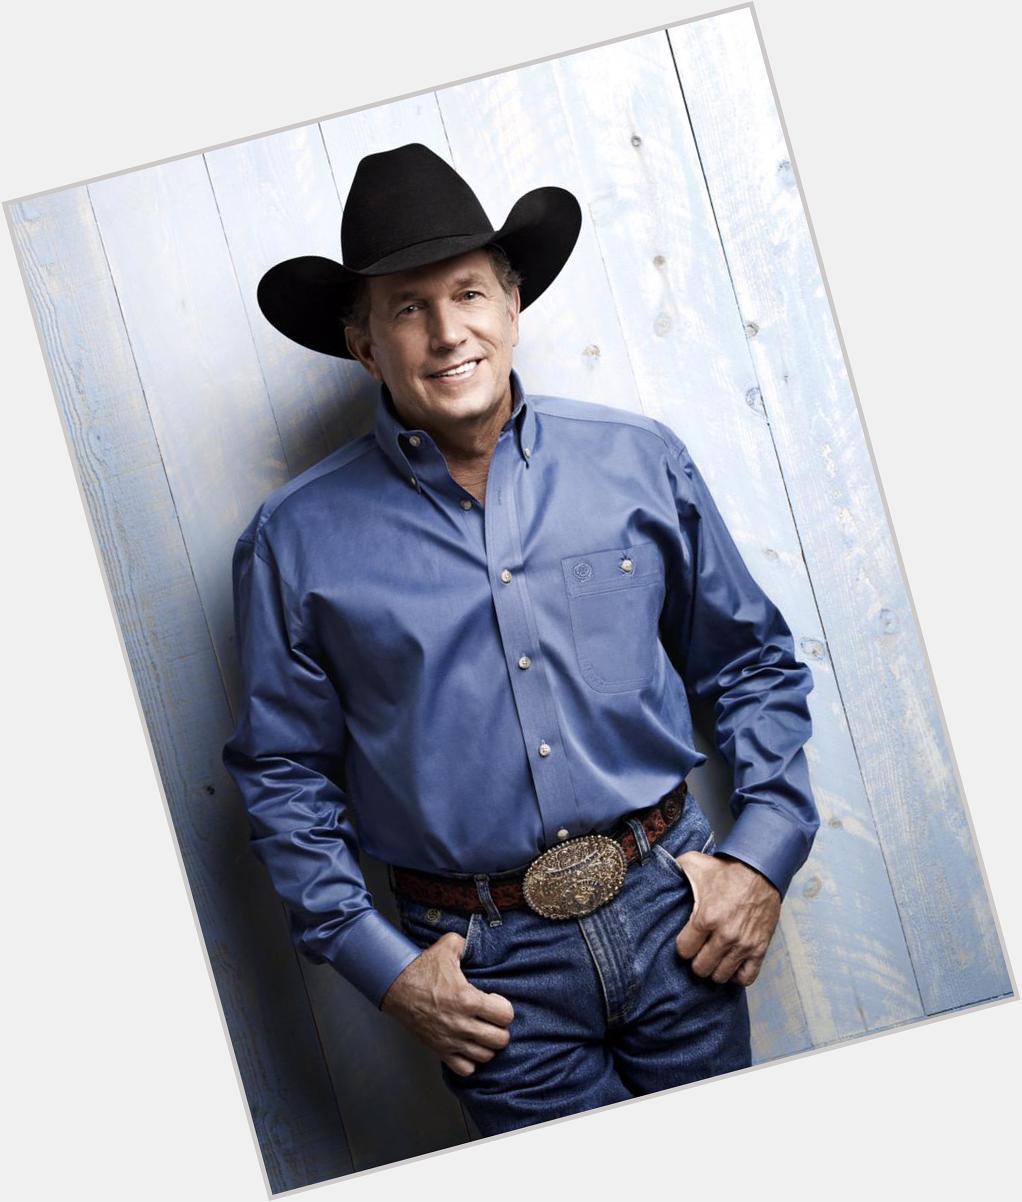 Happy Birthday to the greatest man to ever sing country music. The King. George Strait. 